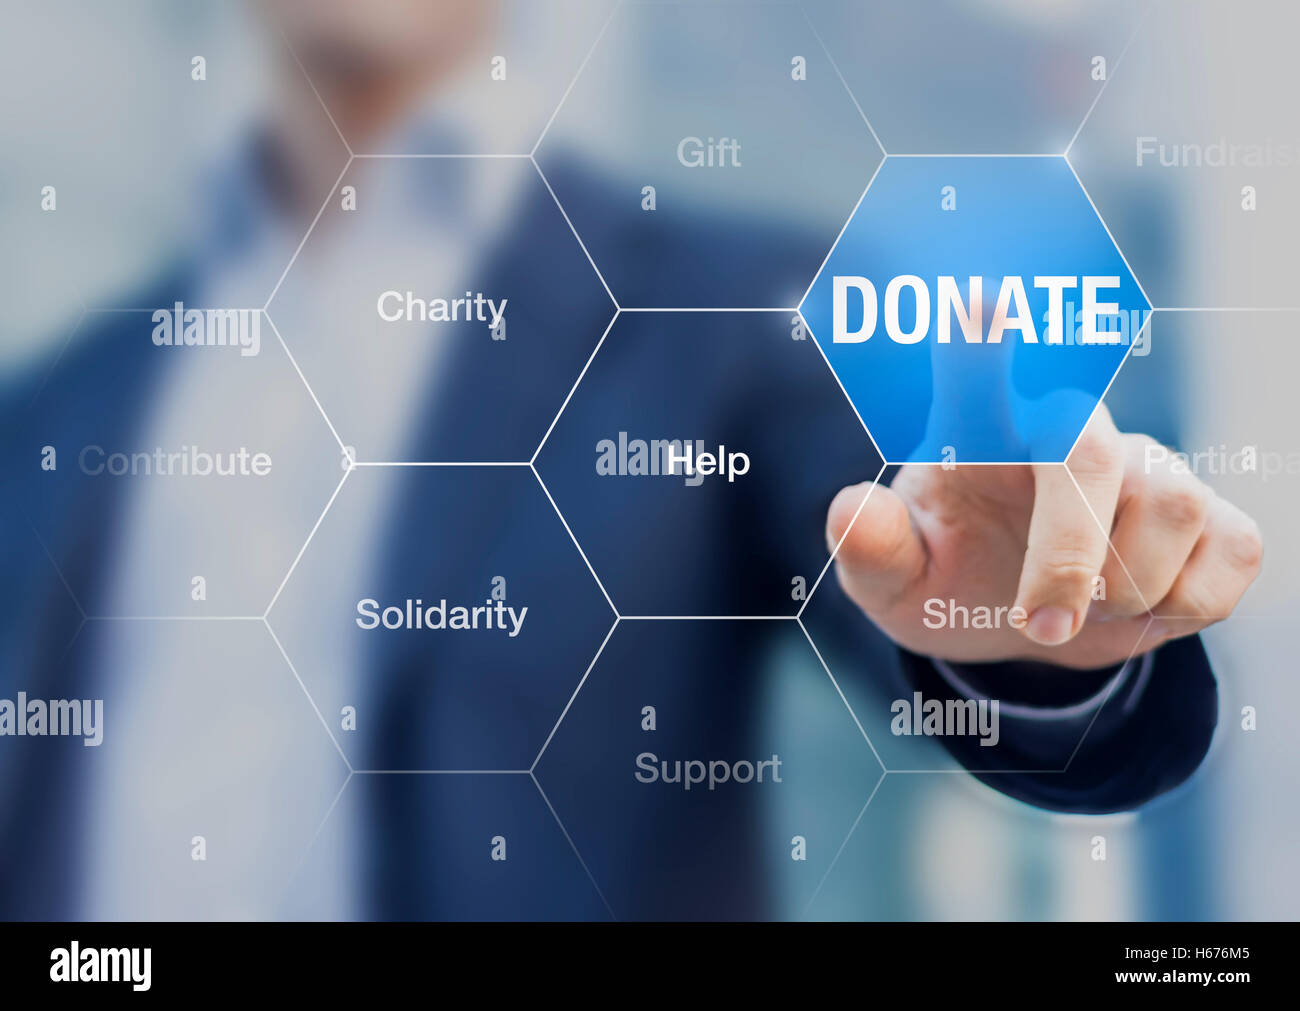 Donate button with words about helping, supporting and contributing and a person in background Stock Photo